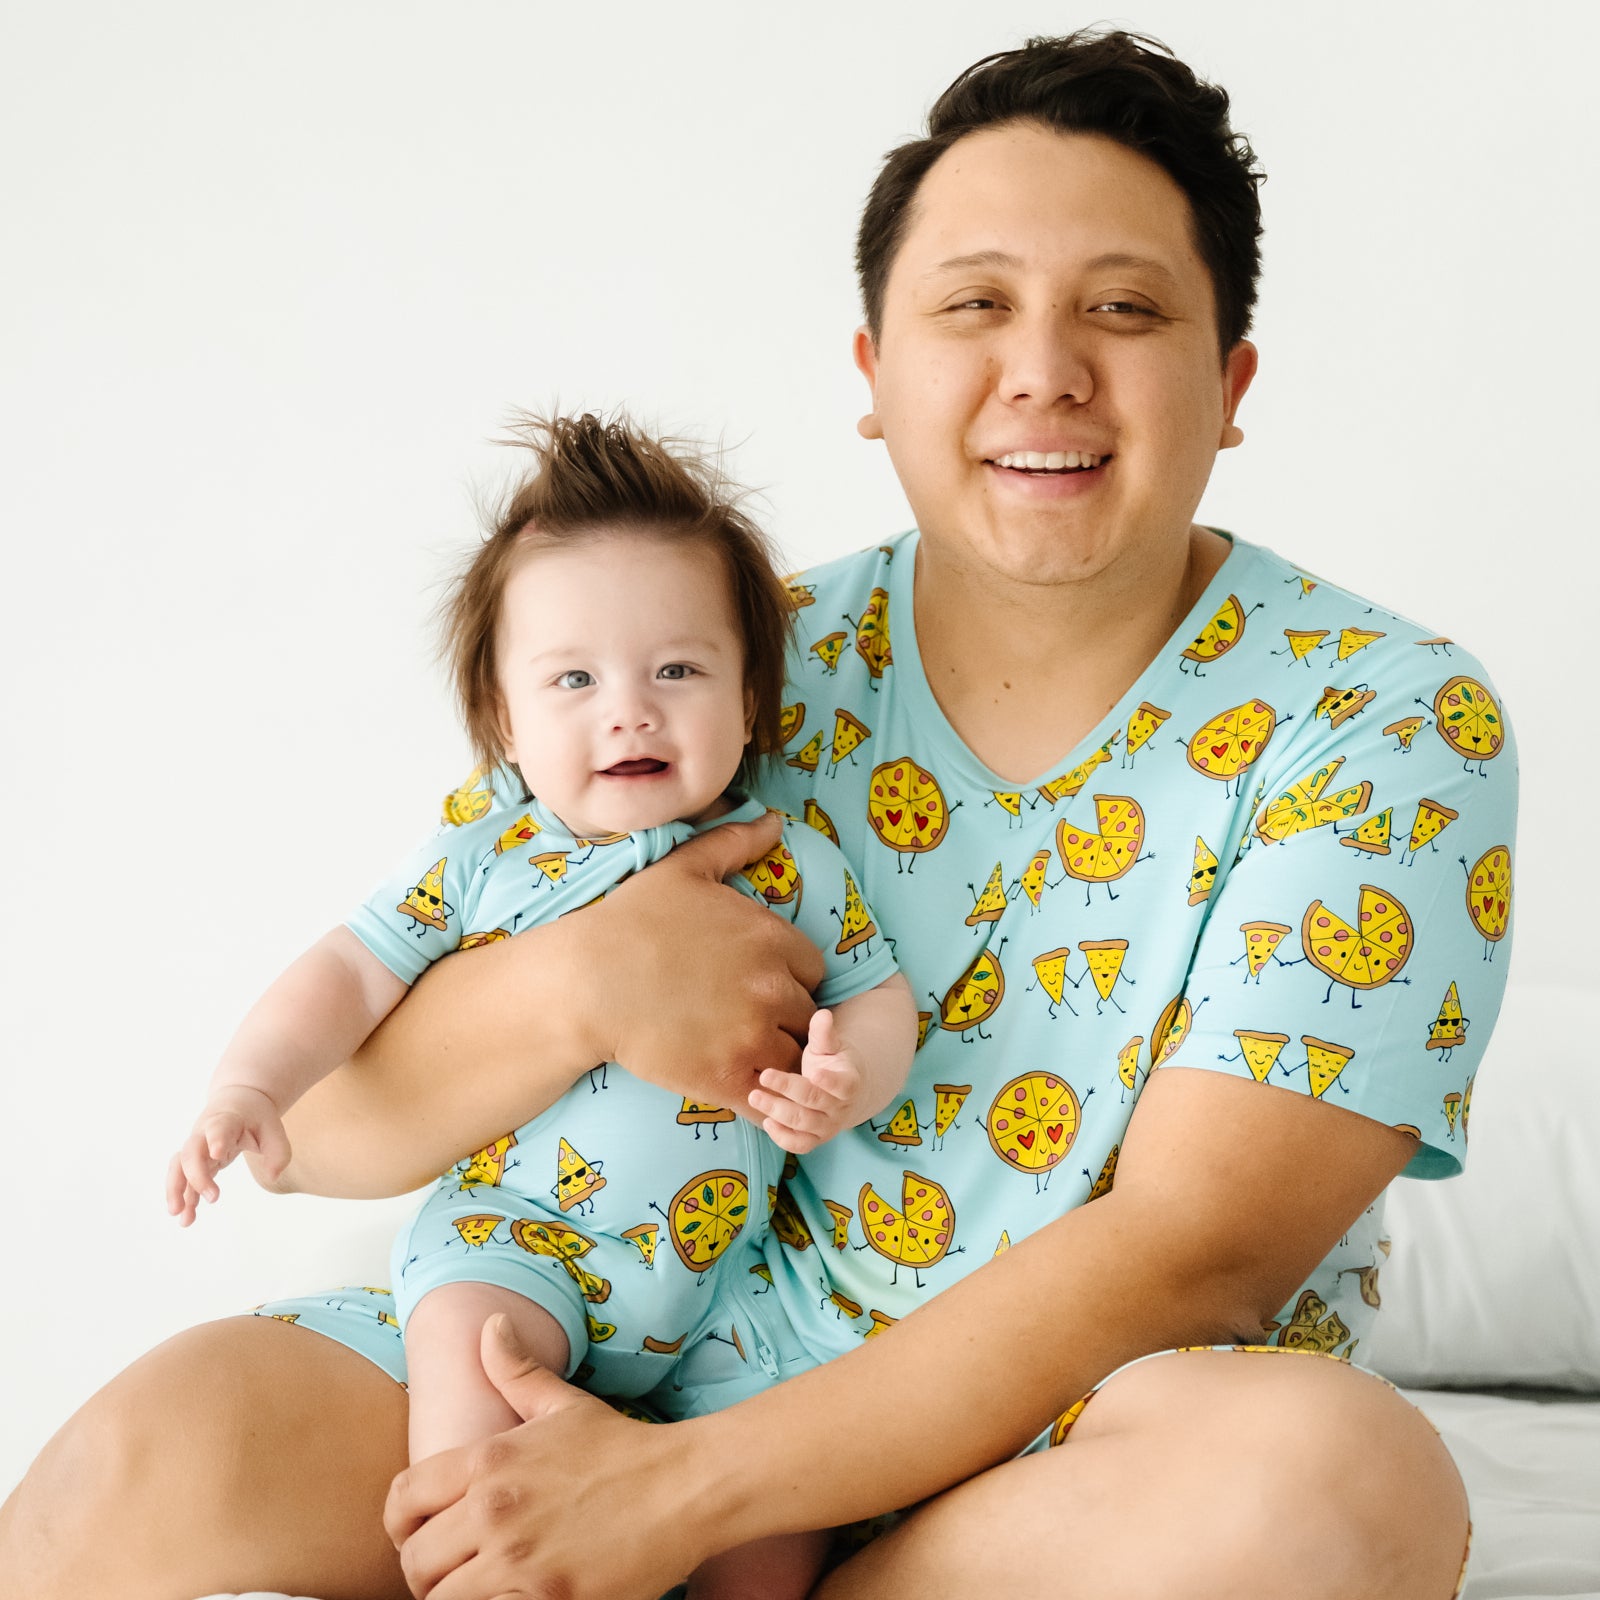 Father and child wearing matching Pizza Pals pajamas. Dad is wearing men's Pizza Pals pj top and child is wearing a matching shorty zippy